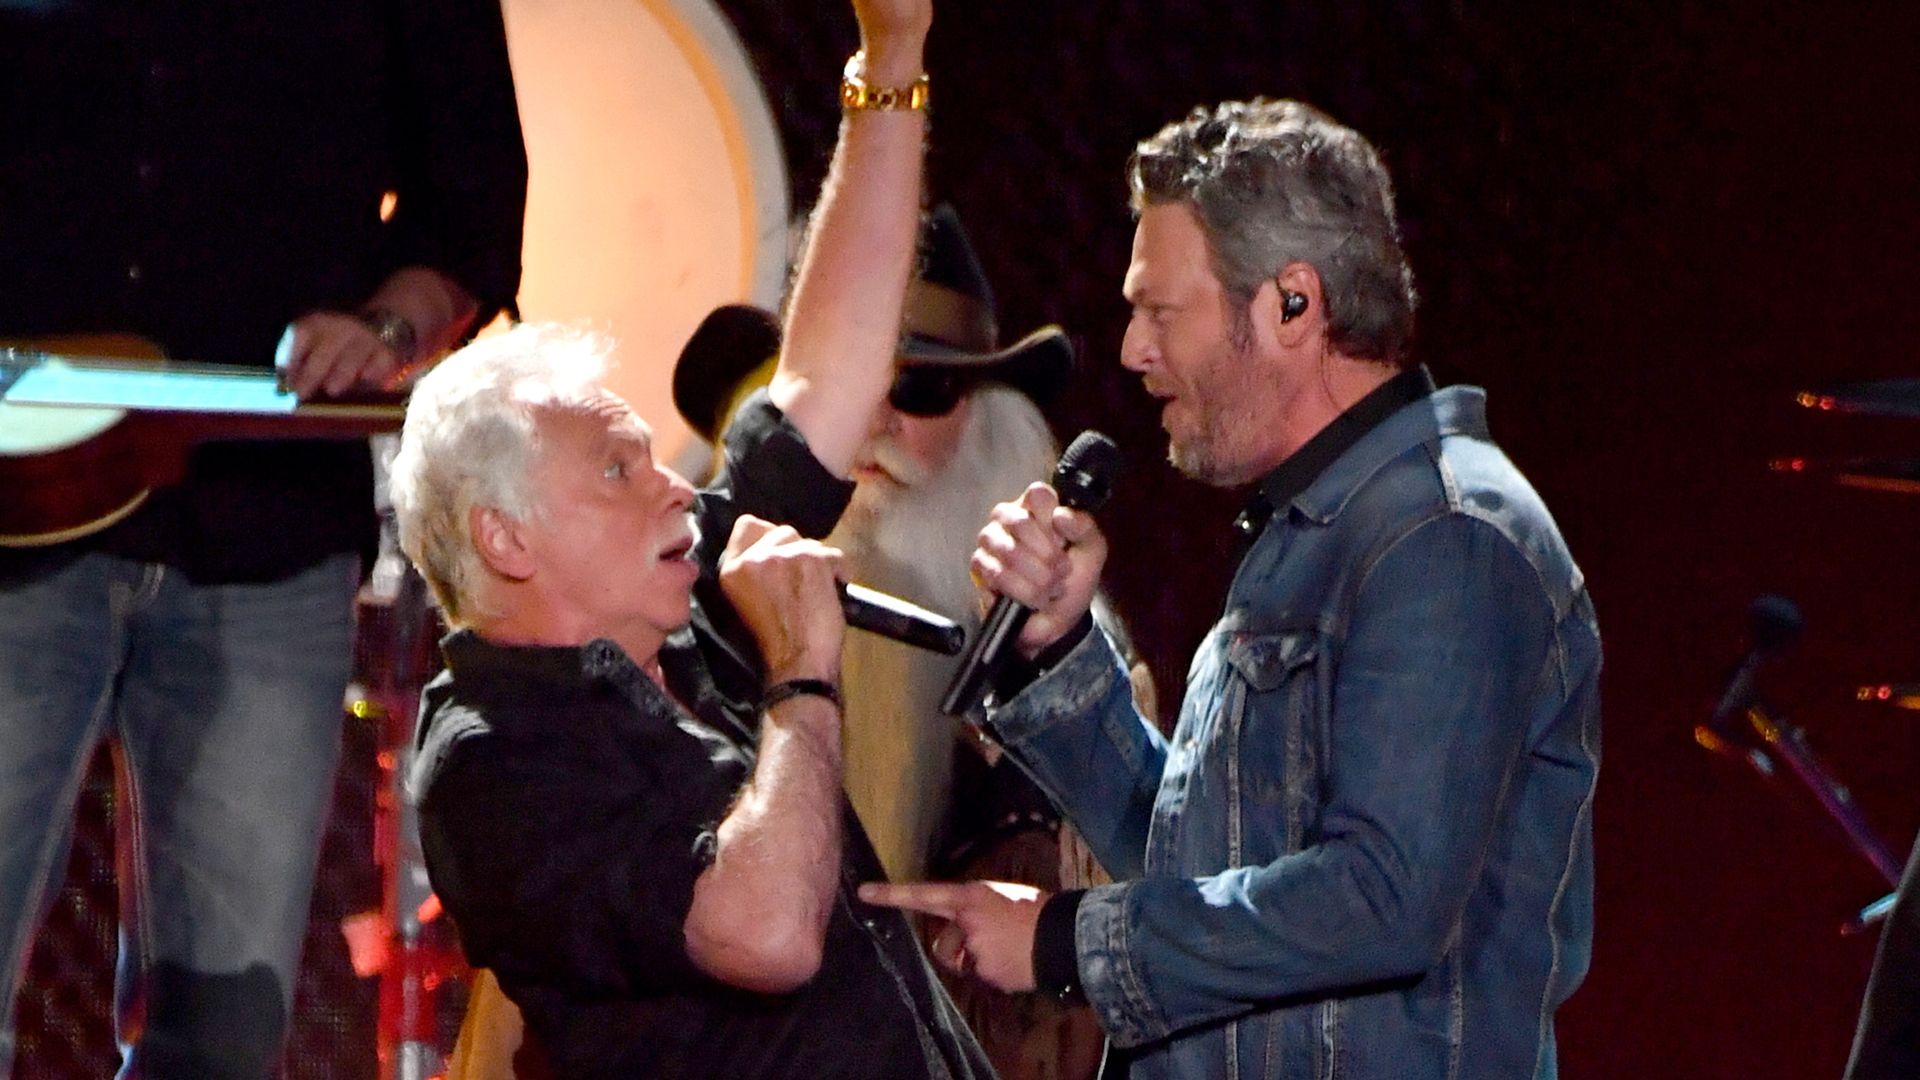 Blake Shelton (center) performs with the Oak Ridge Boys' Joe Bonsall and Richard Sterban onstage during the 2016 CMT Music awards at the Bridgestone Arena on June 8, 2016 in Nashville, Tennessee.